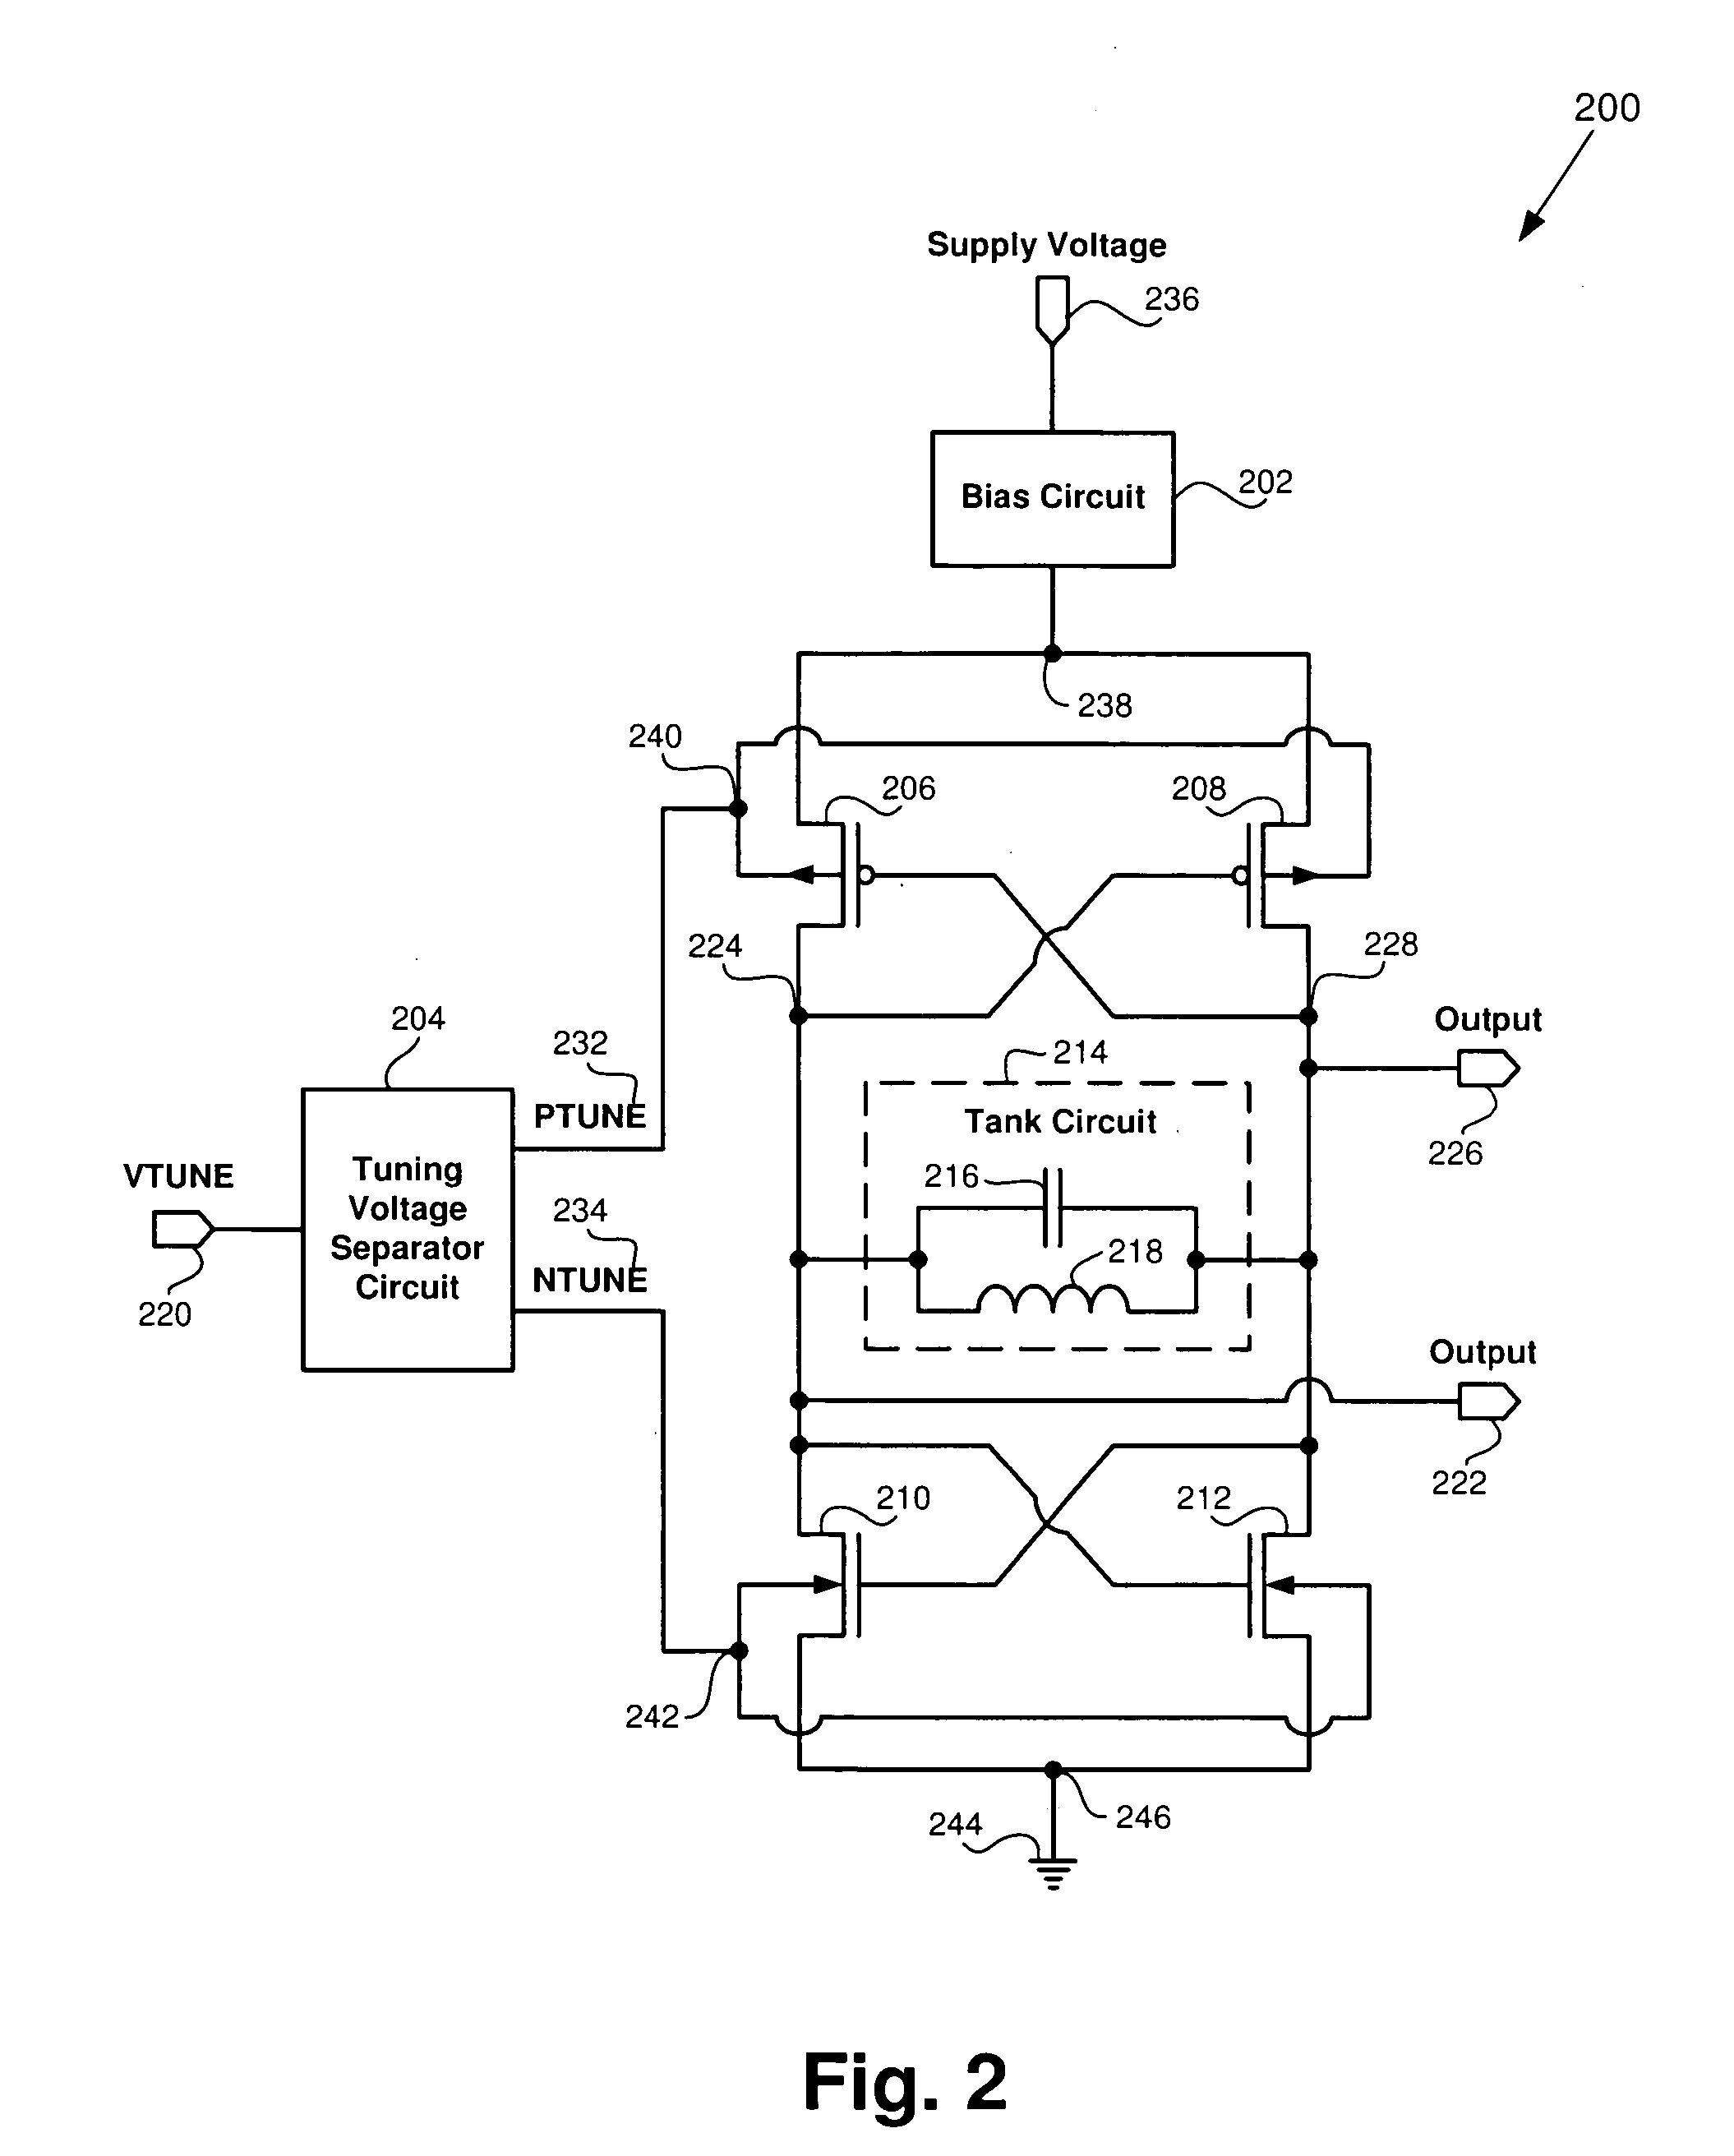 Voltage controlled oscillator with varactor-less tuning